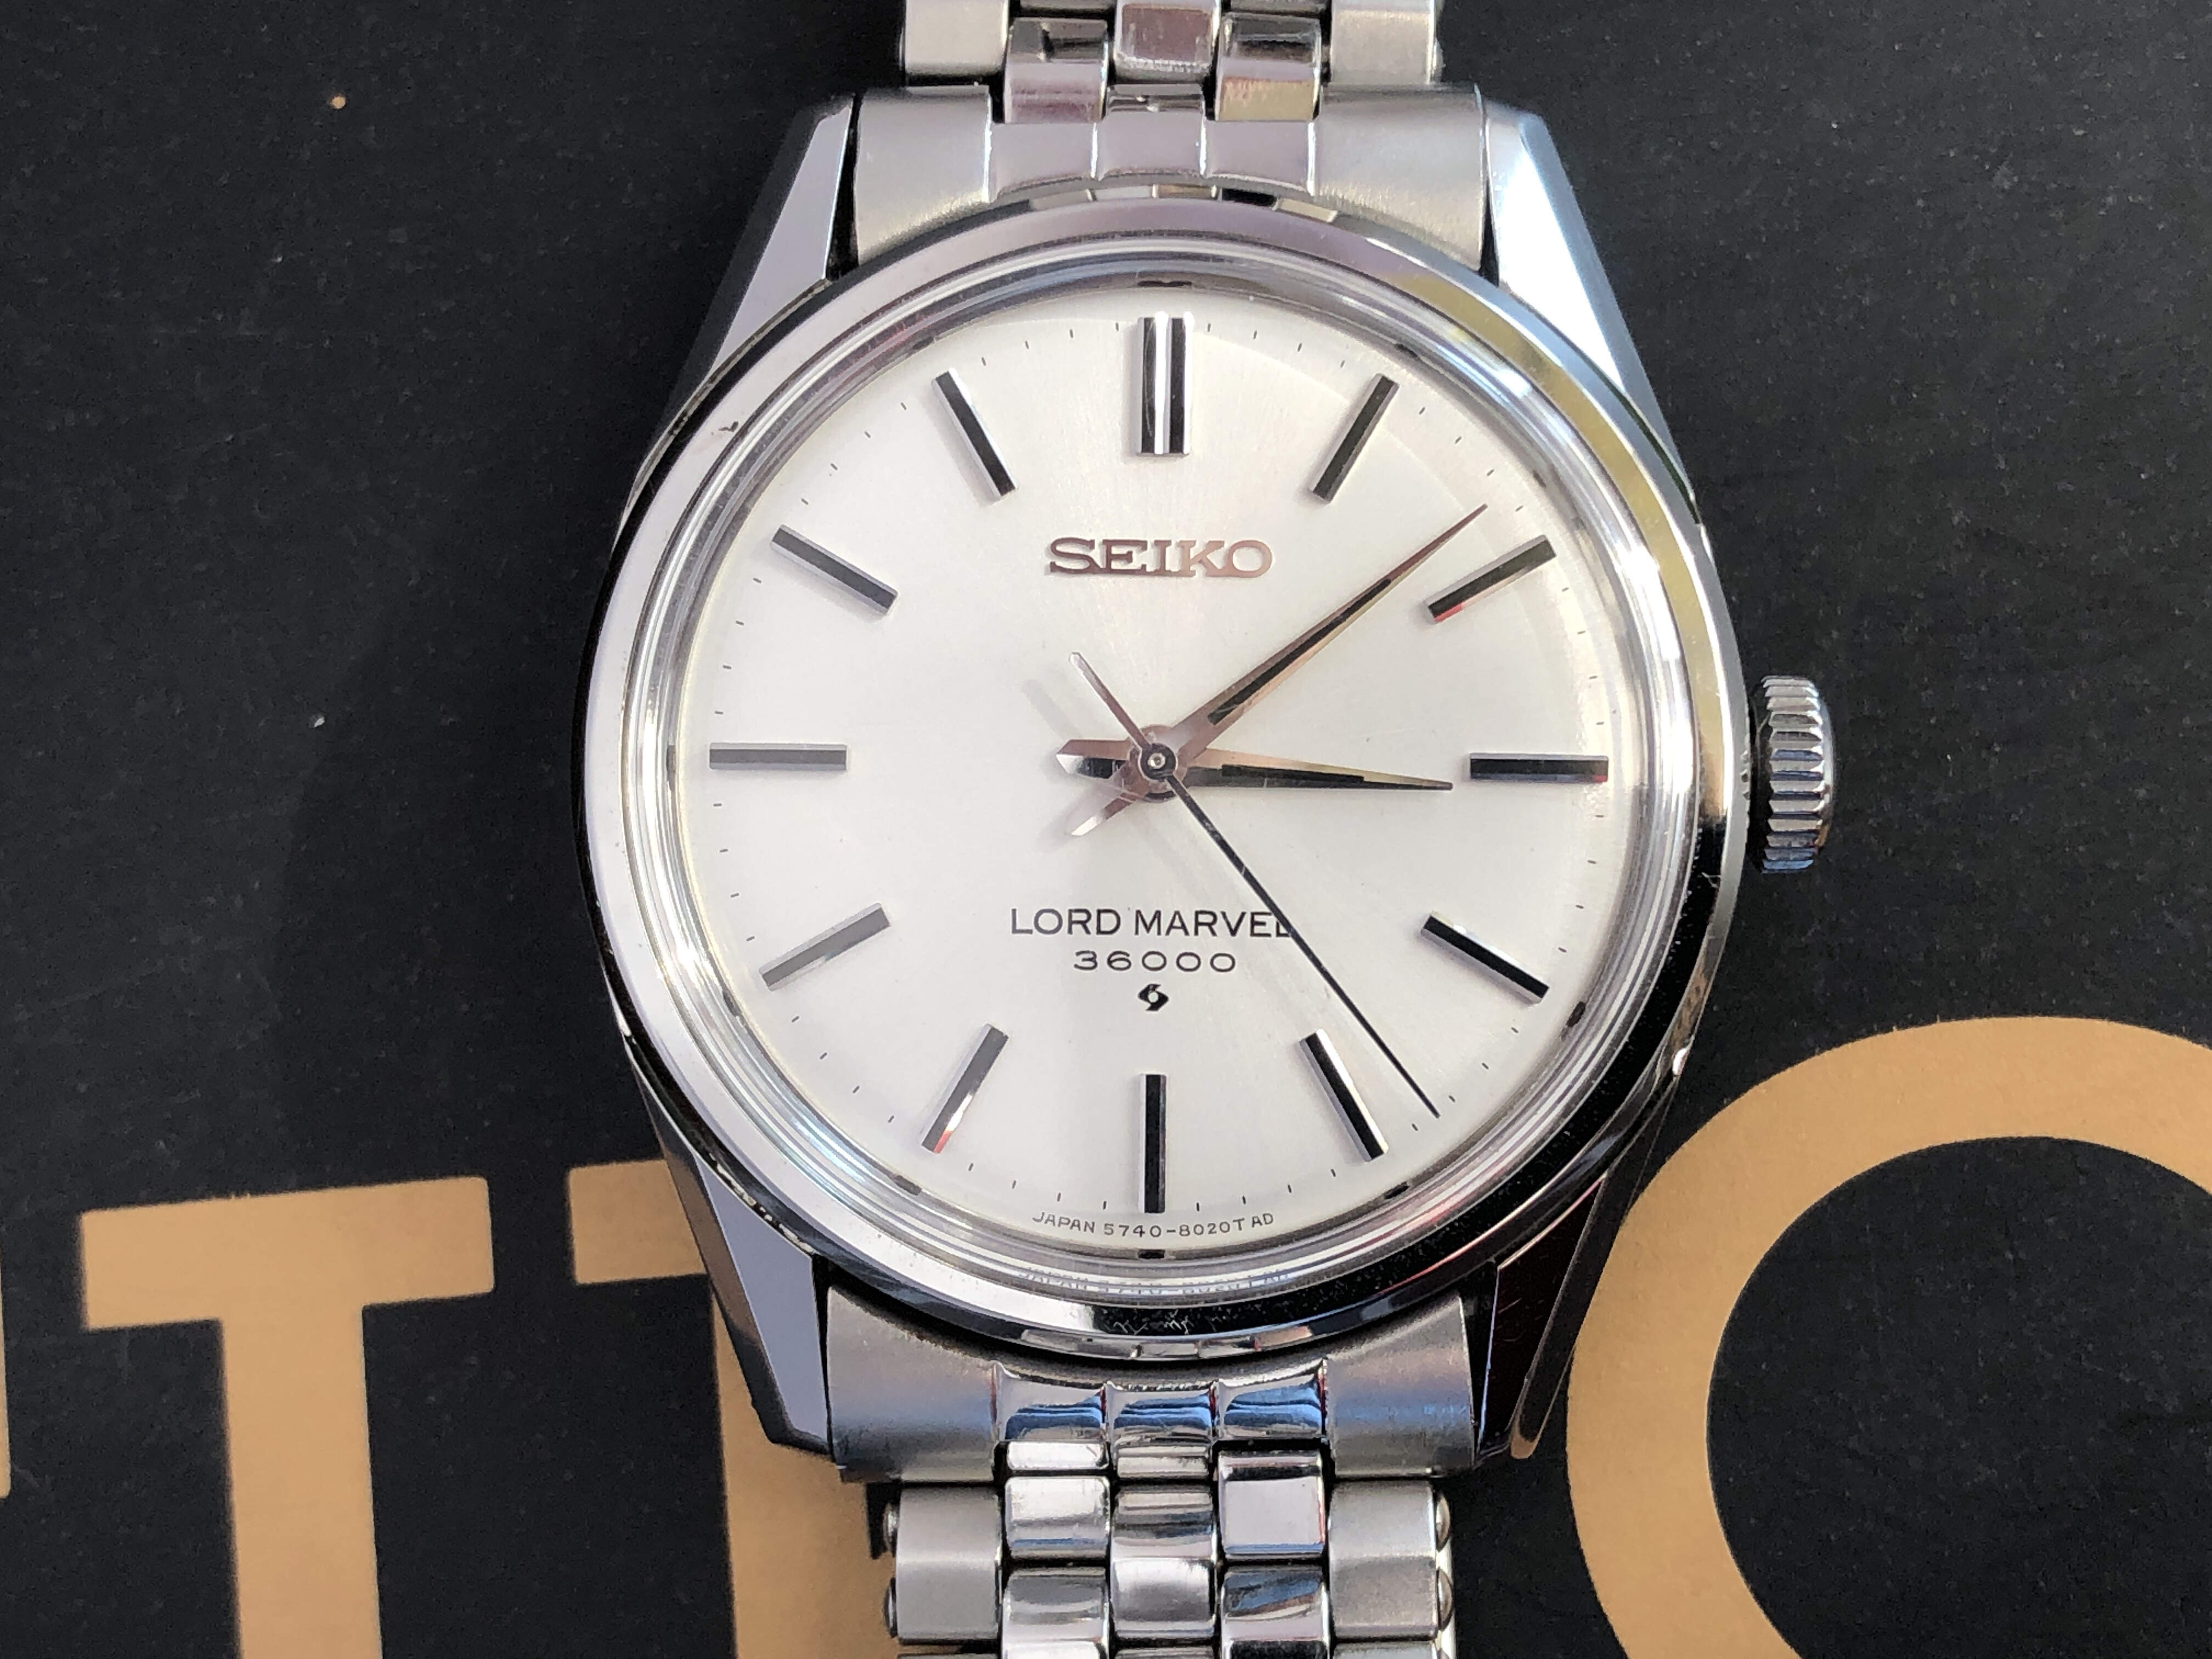 Seiko Lord Marvel 5740-8000 (Sold)